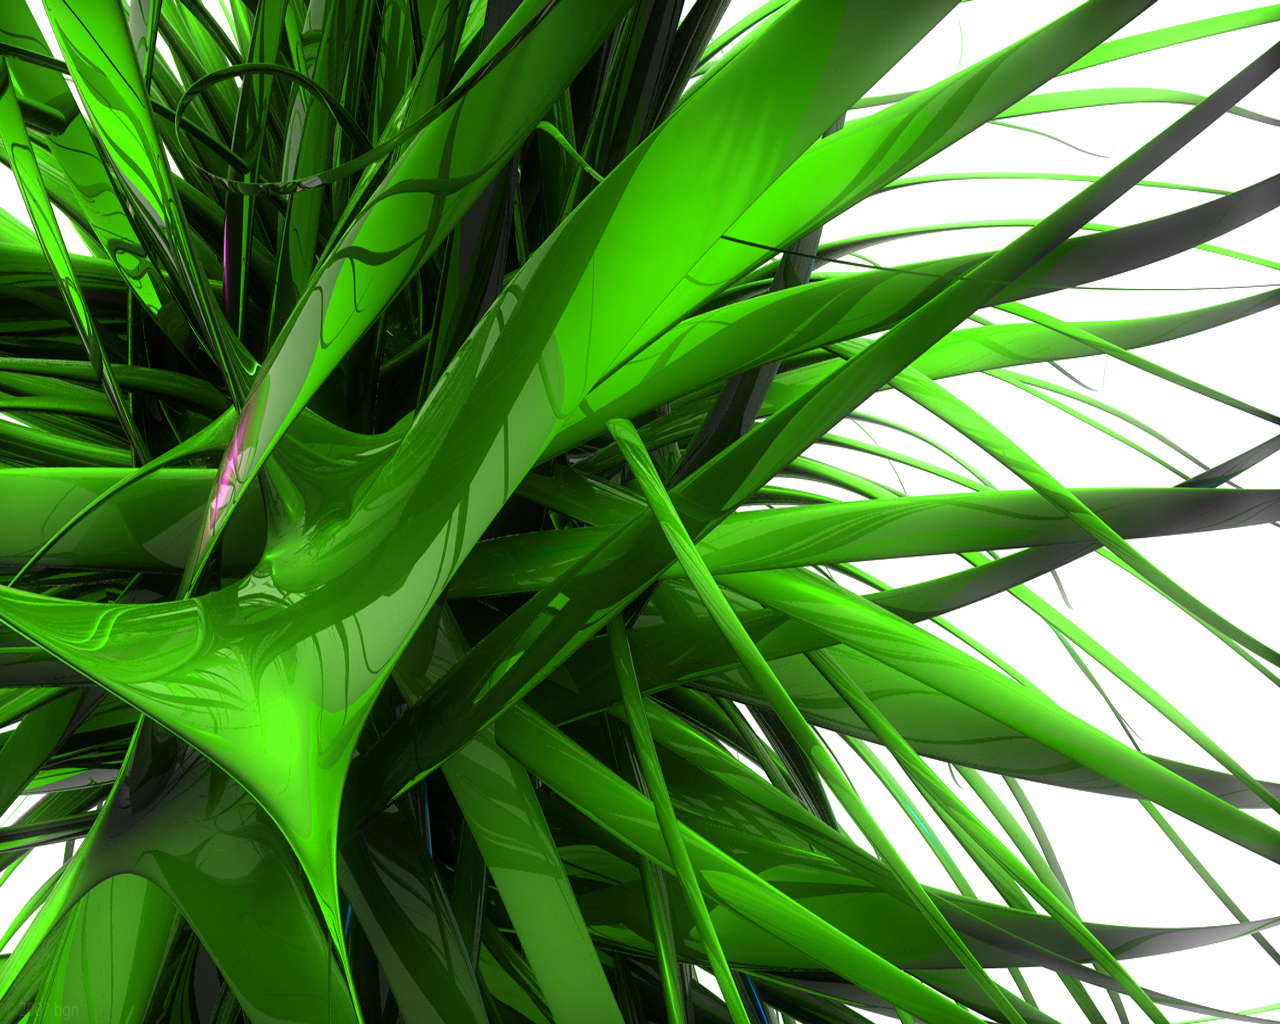 3d, cgi, abstract, green lock screen backgrounds